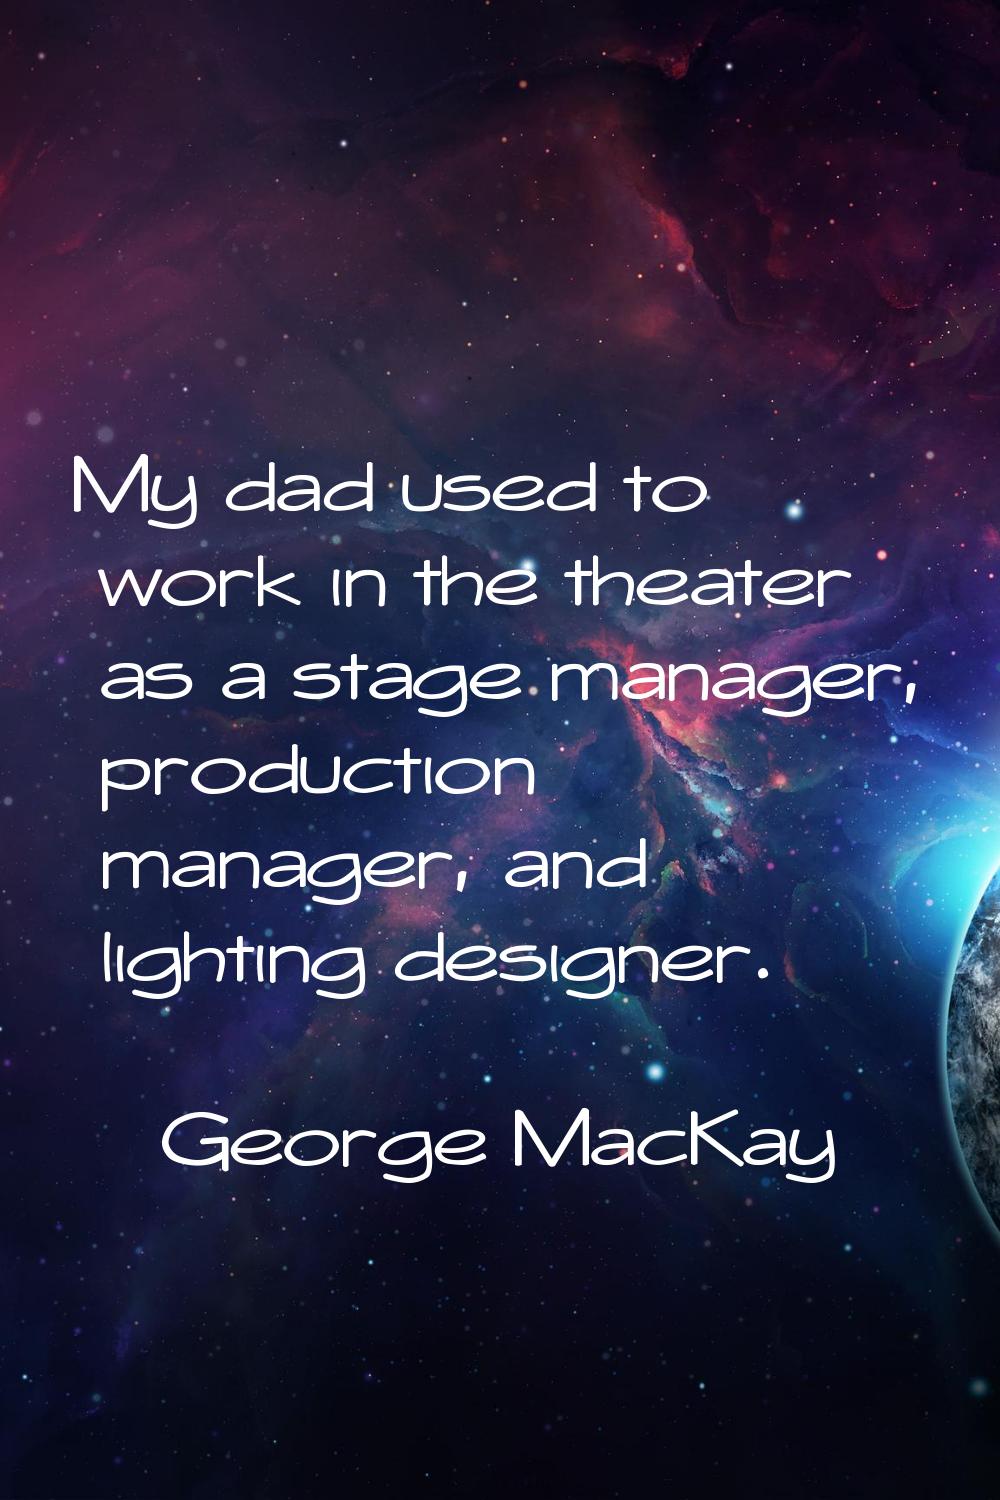 My dad used to work in the theater as a stage manager, production manager, and lighting designer.